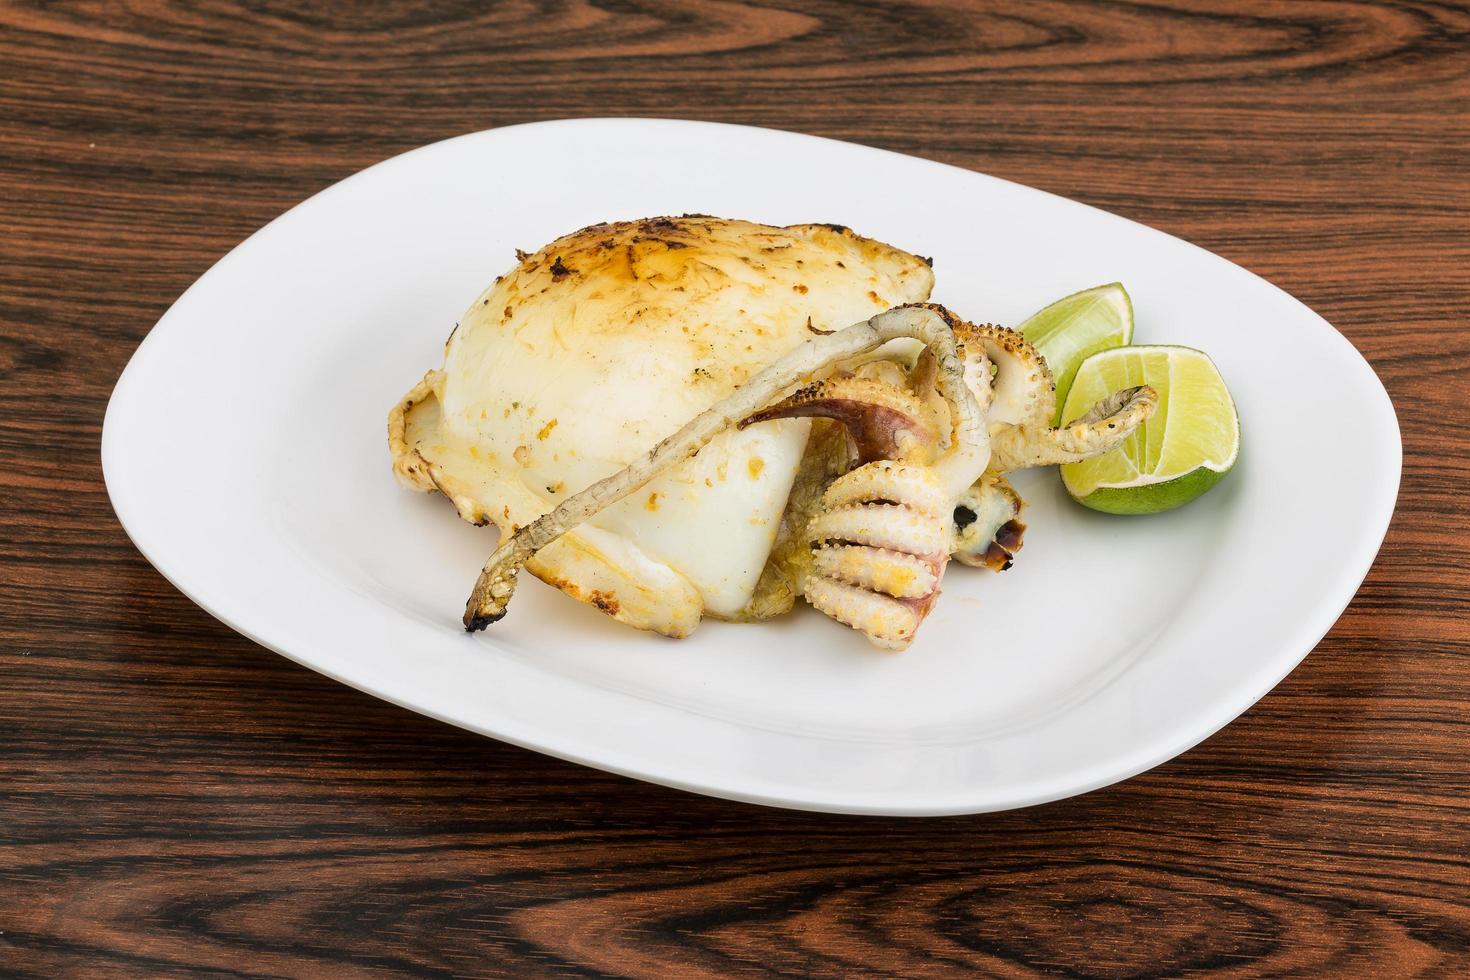 Grilled cuttlefish on the plate and wooden background